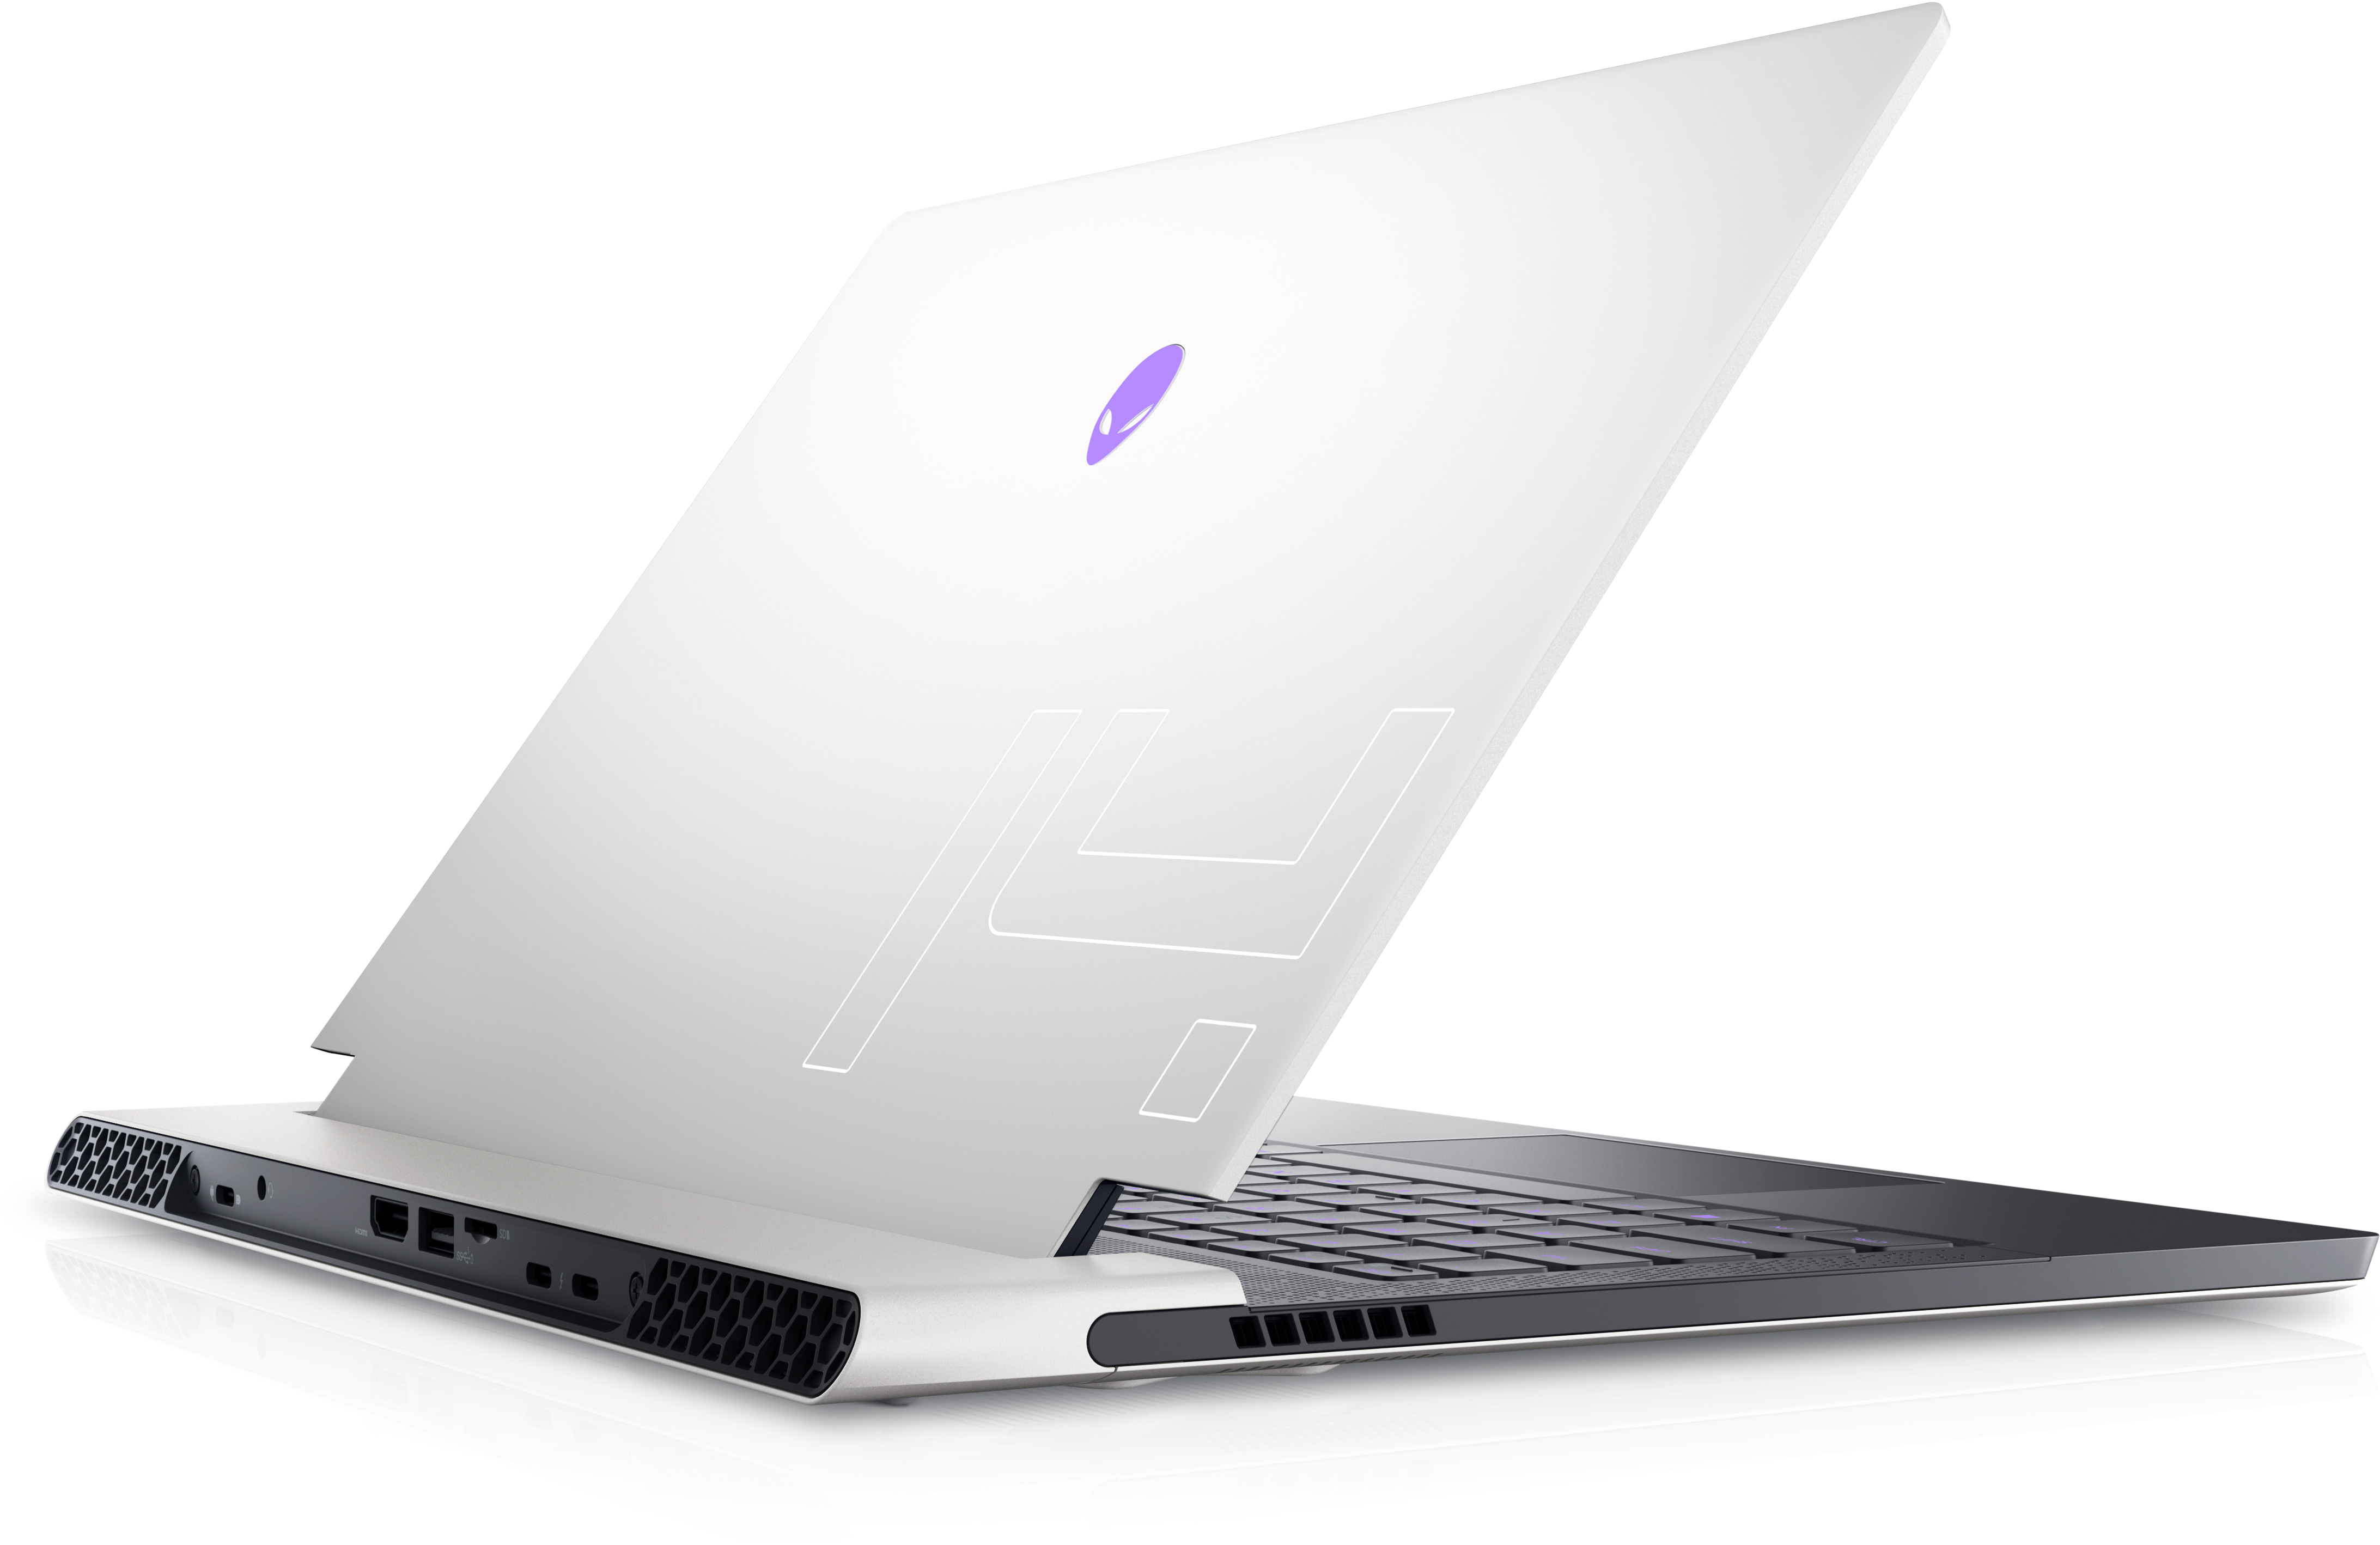 Alienware x14 Gaming Laptop : Gaming Laptop Computers | Dell USA